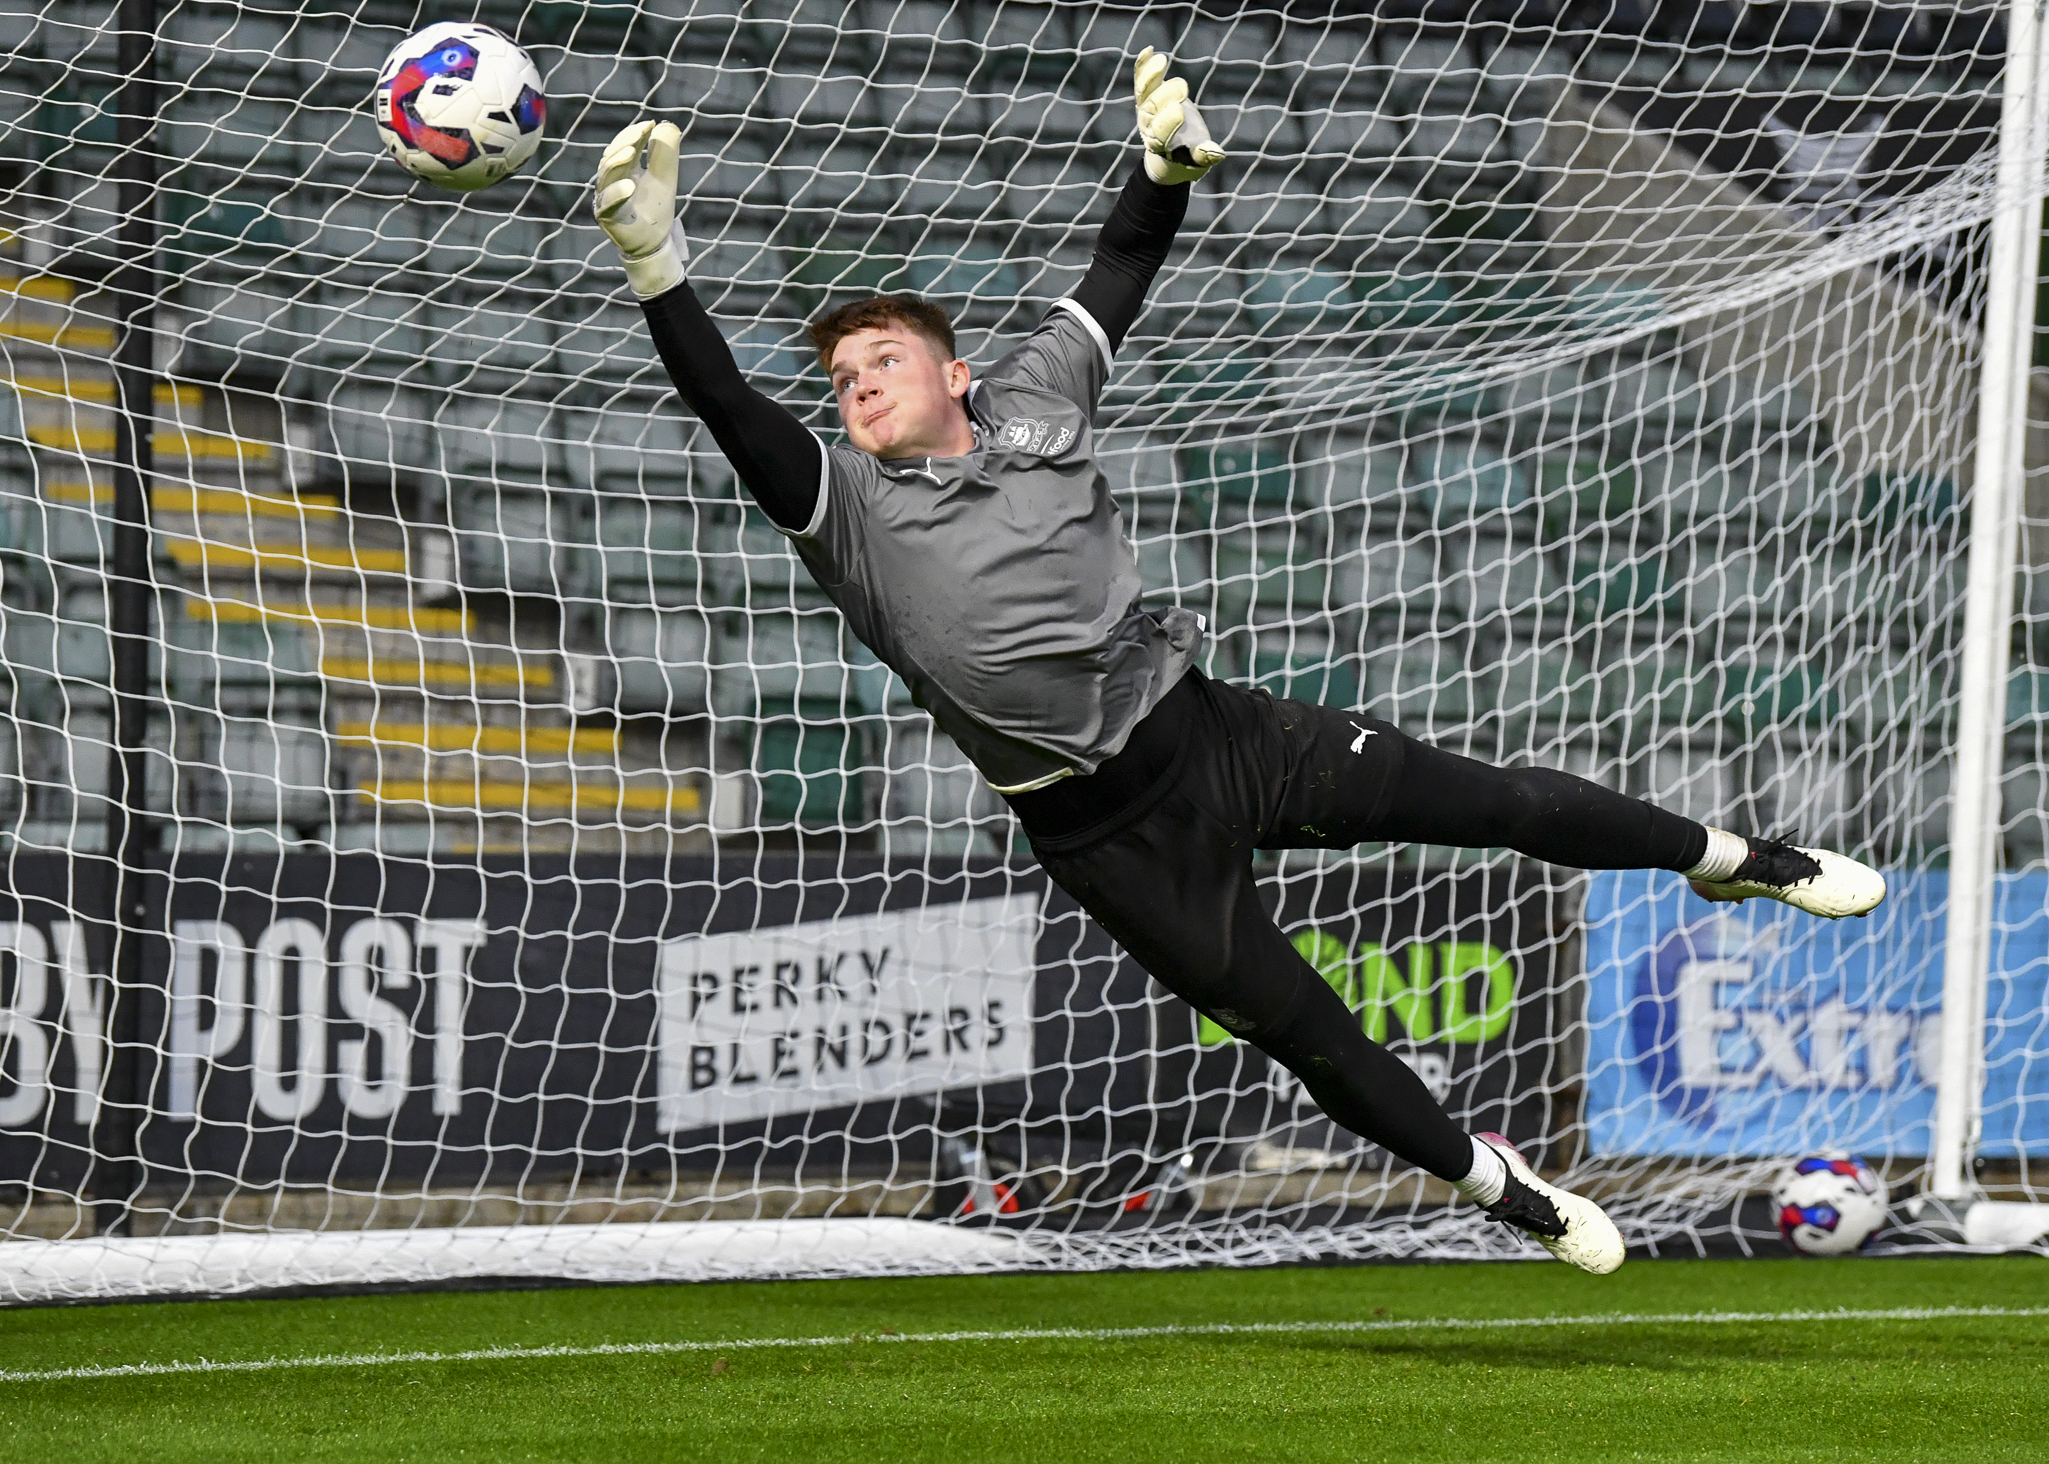 Zak Baker saves a shot in the warm up